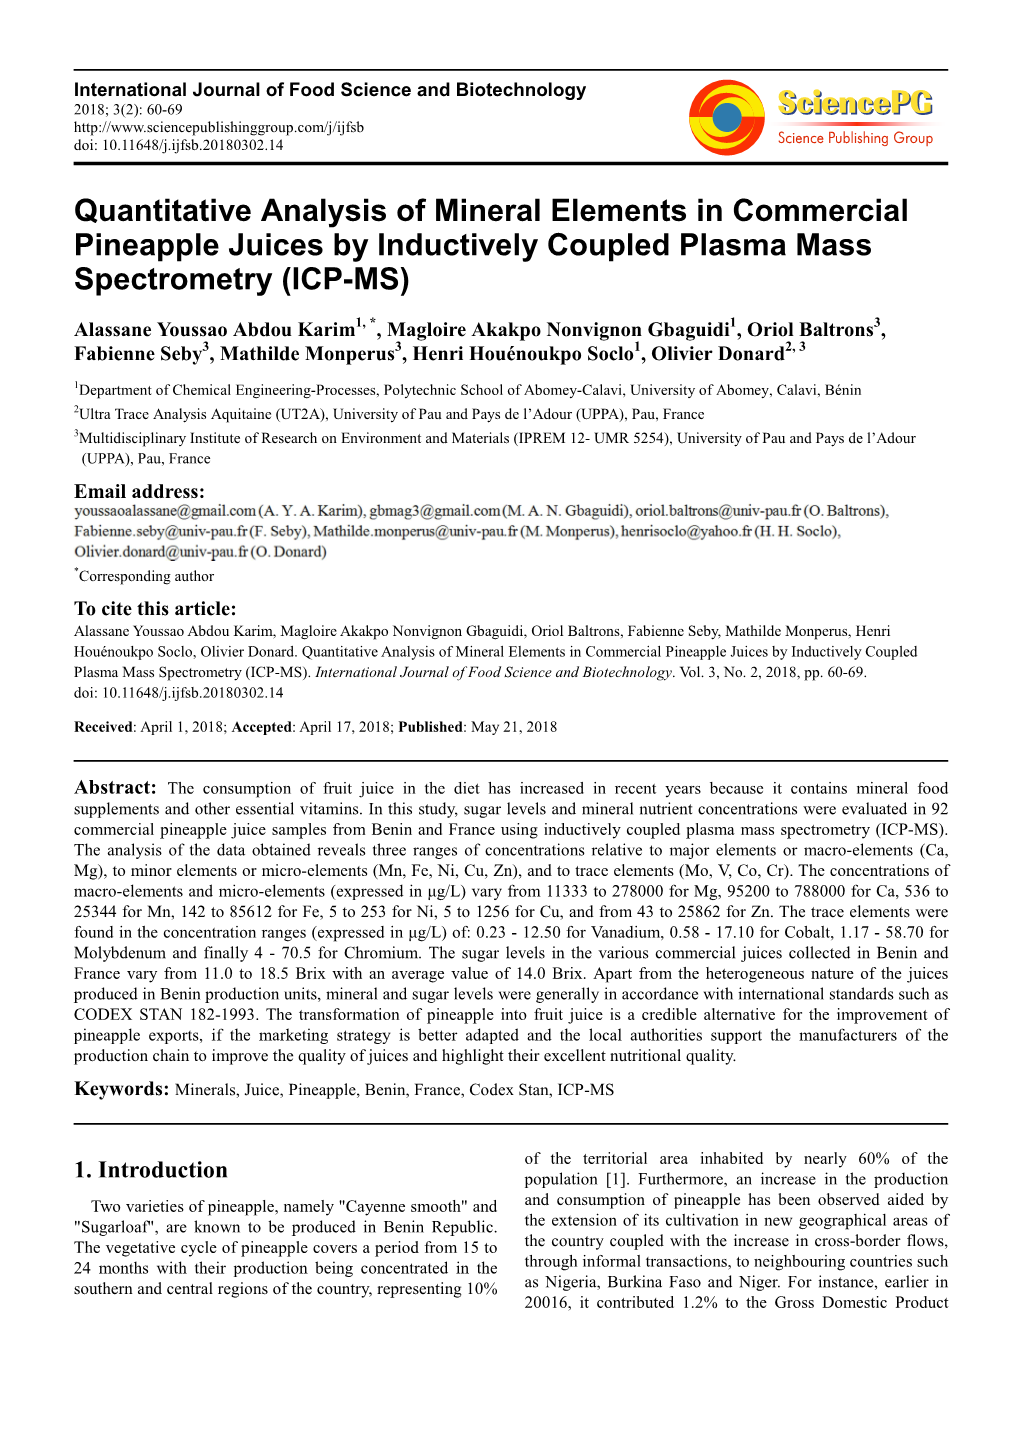 Quantitative Analysis of Mineral Elements in Commercial Pineapple Juices by Inductively Coupled Plasma Mass Spectrometry (ICP-MS)